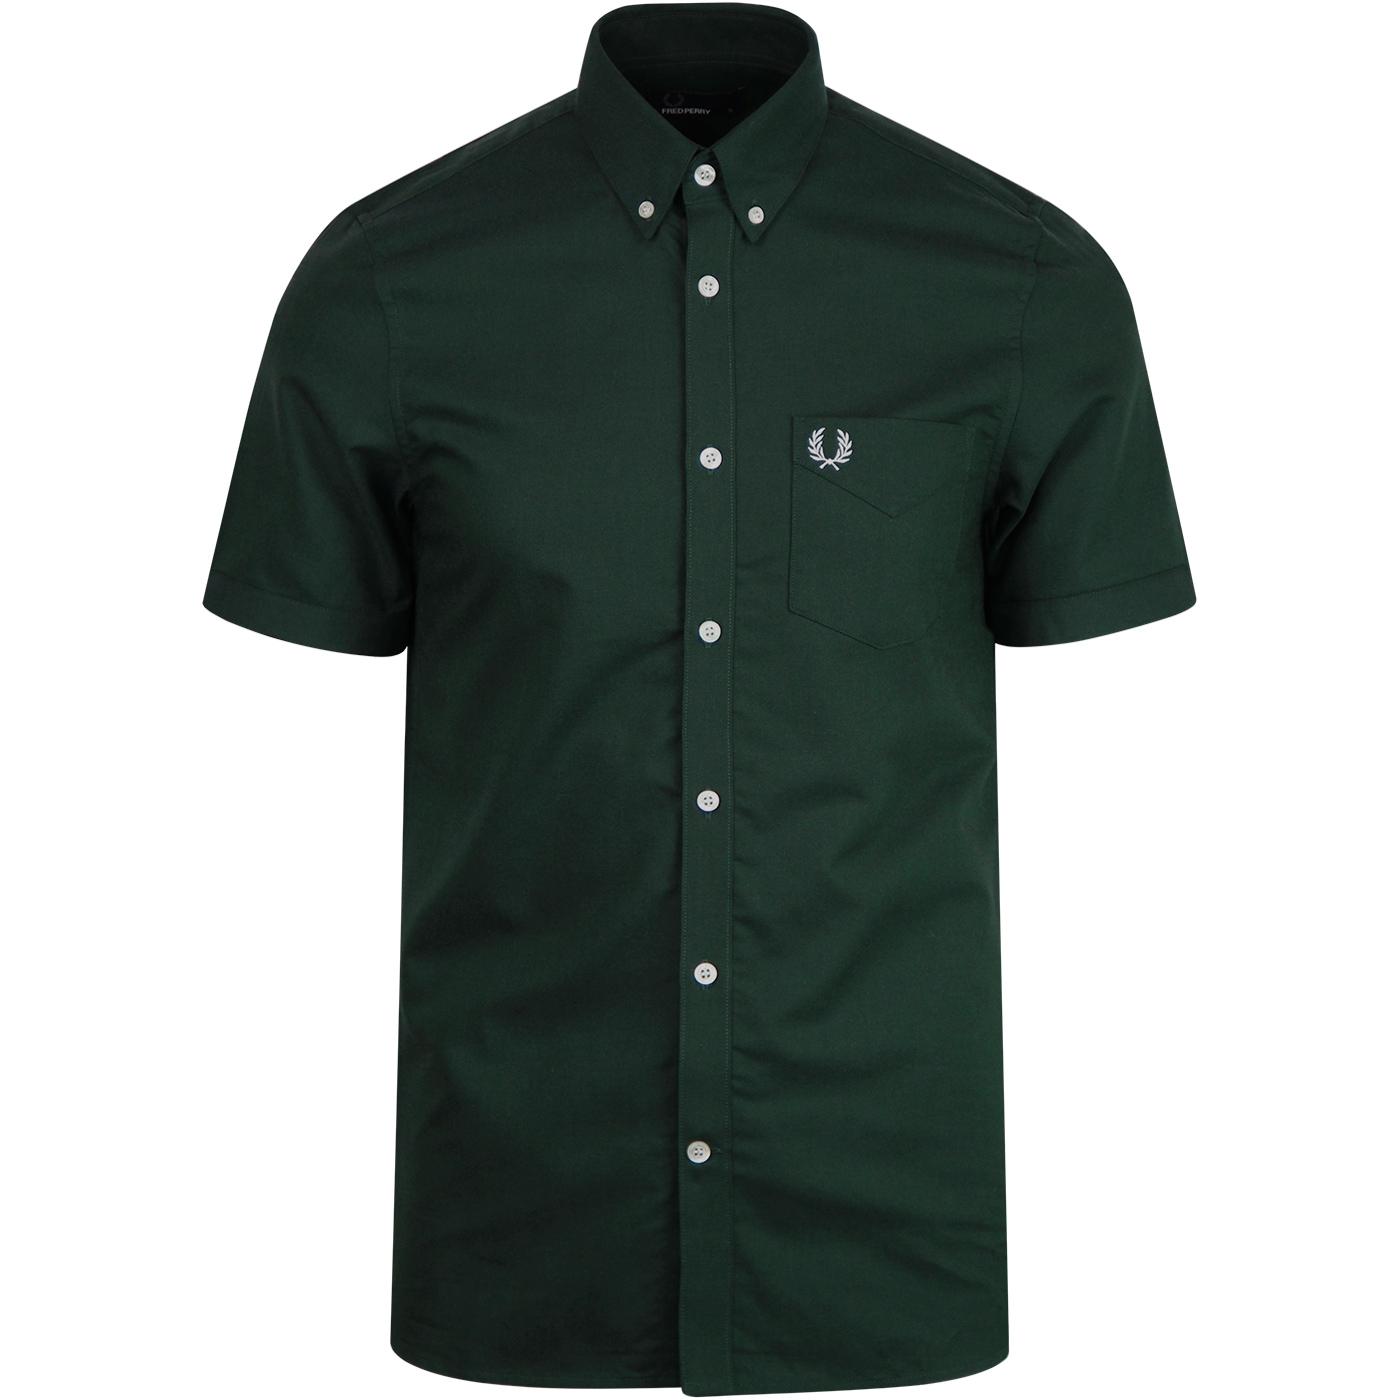 FRED PERRY Ivy League Short Sleeve Oxford Shirt in Mallard